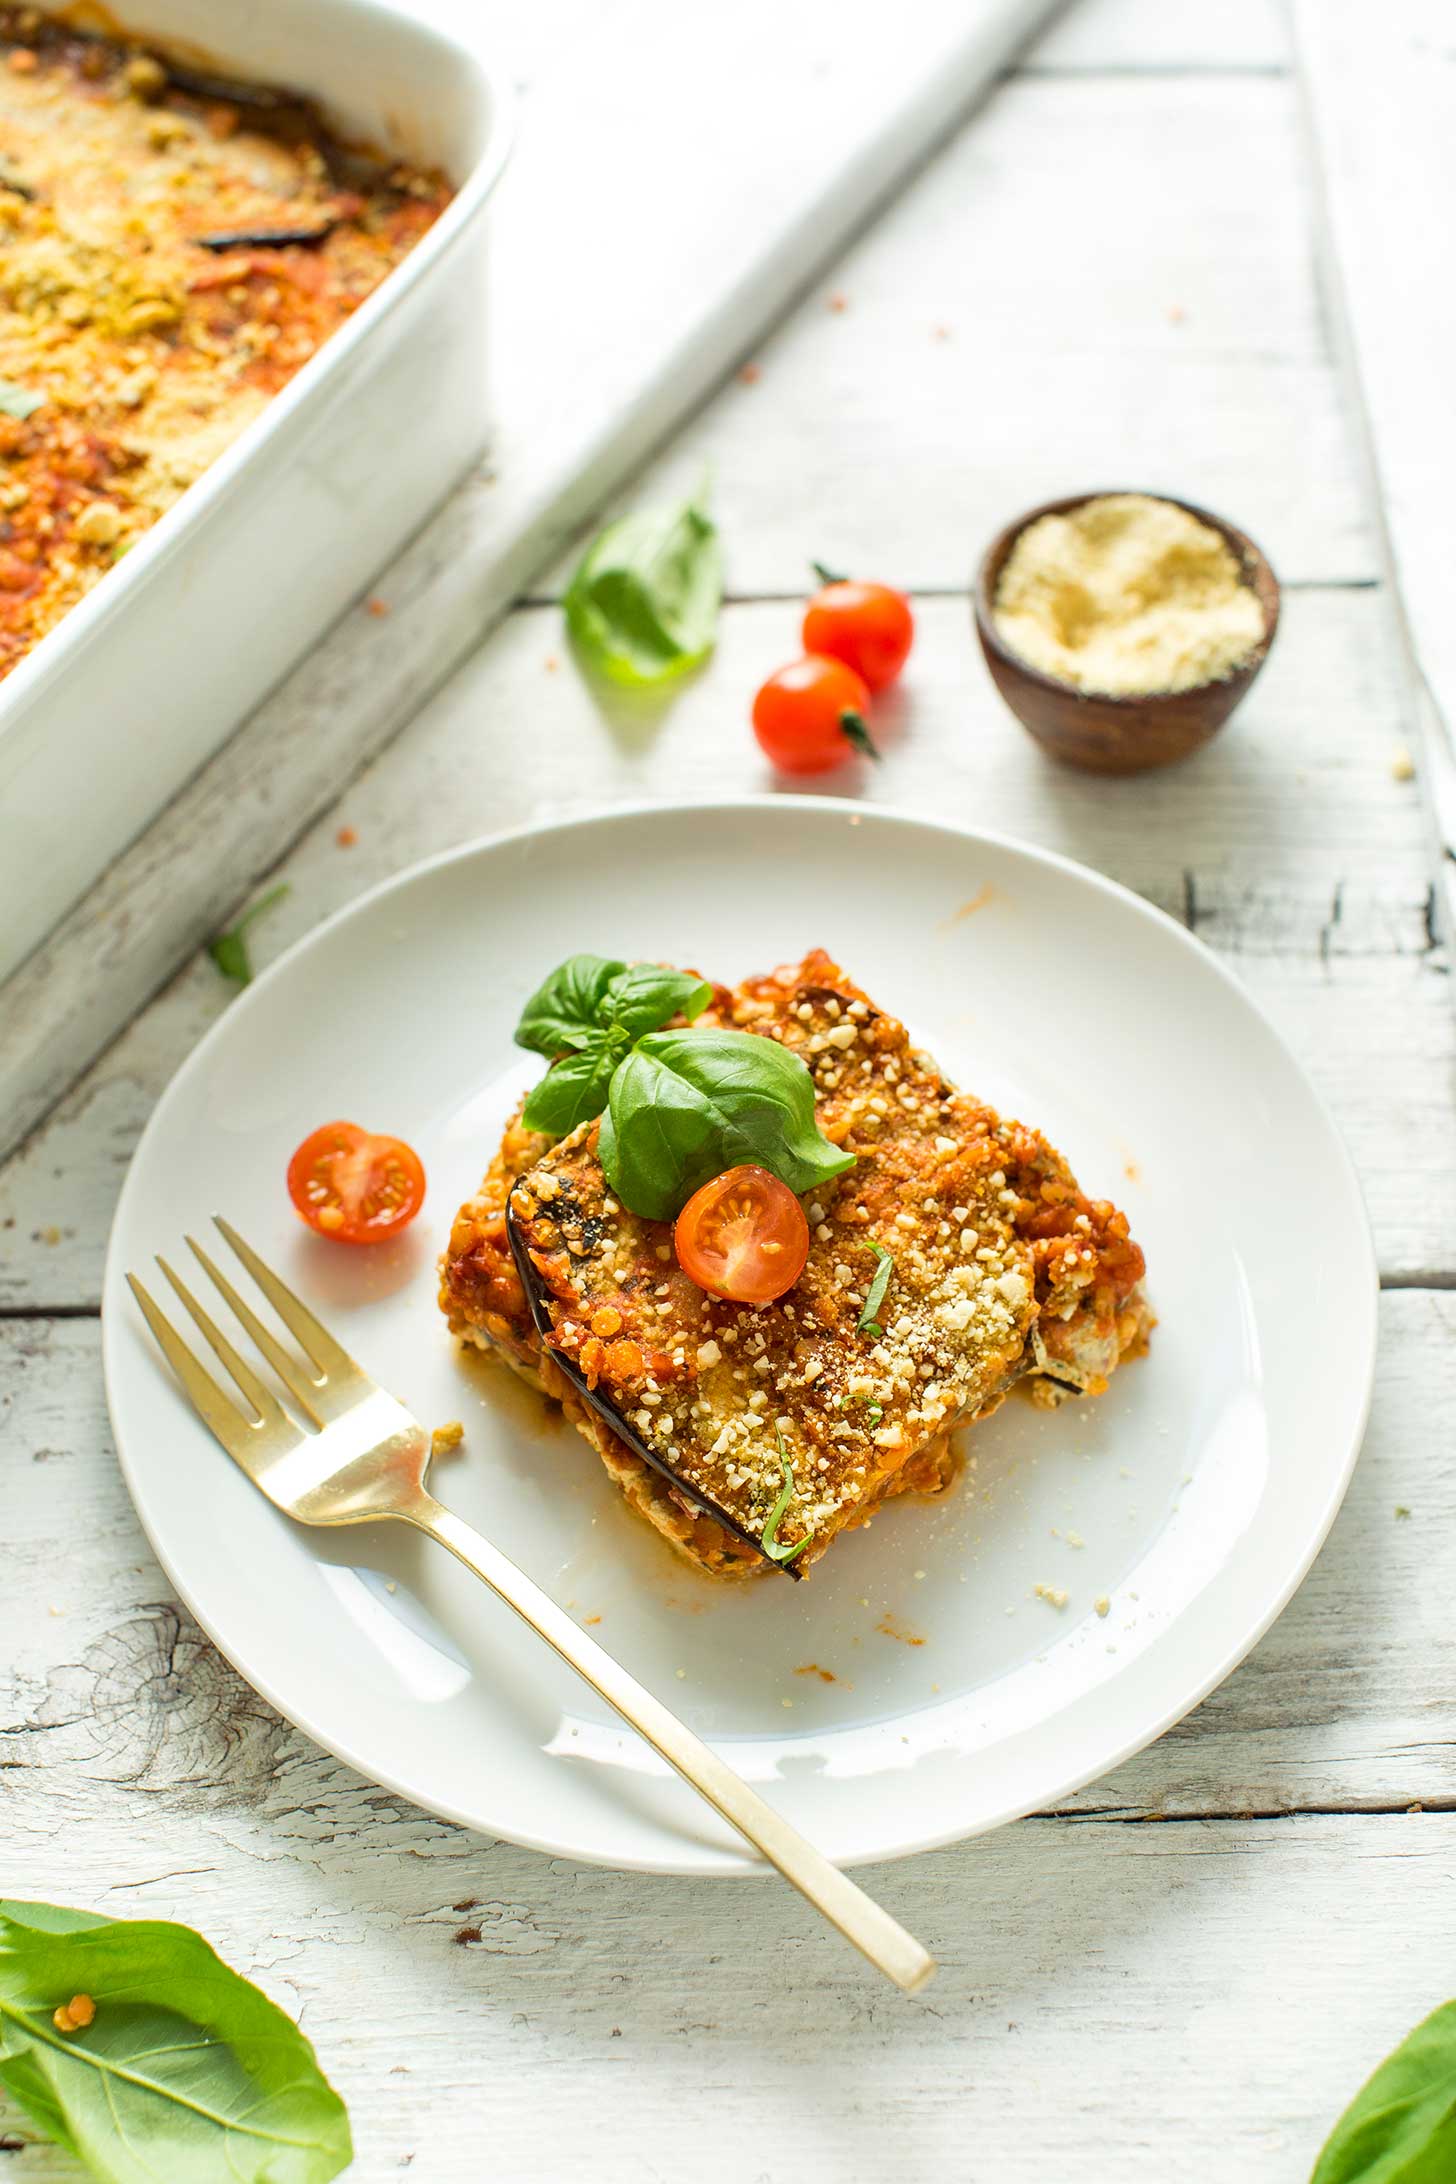 A plate of eggplant lasagna for a comforting gluten-free vegan meal